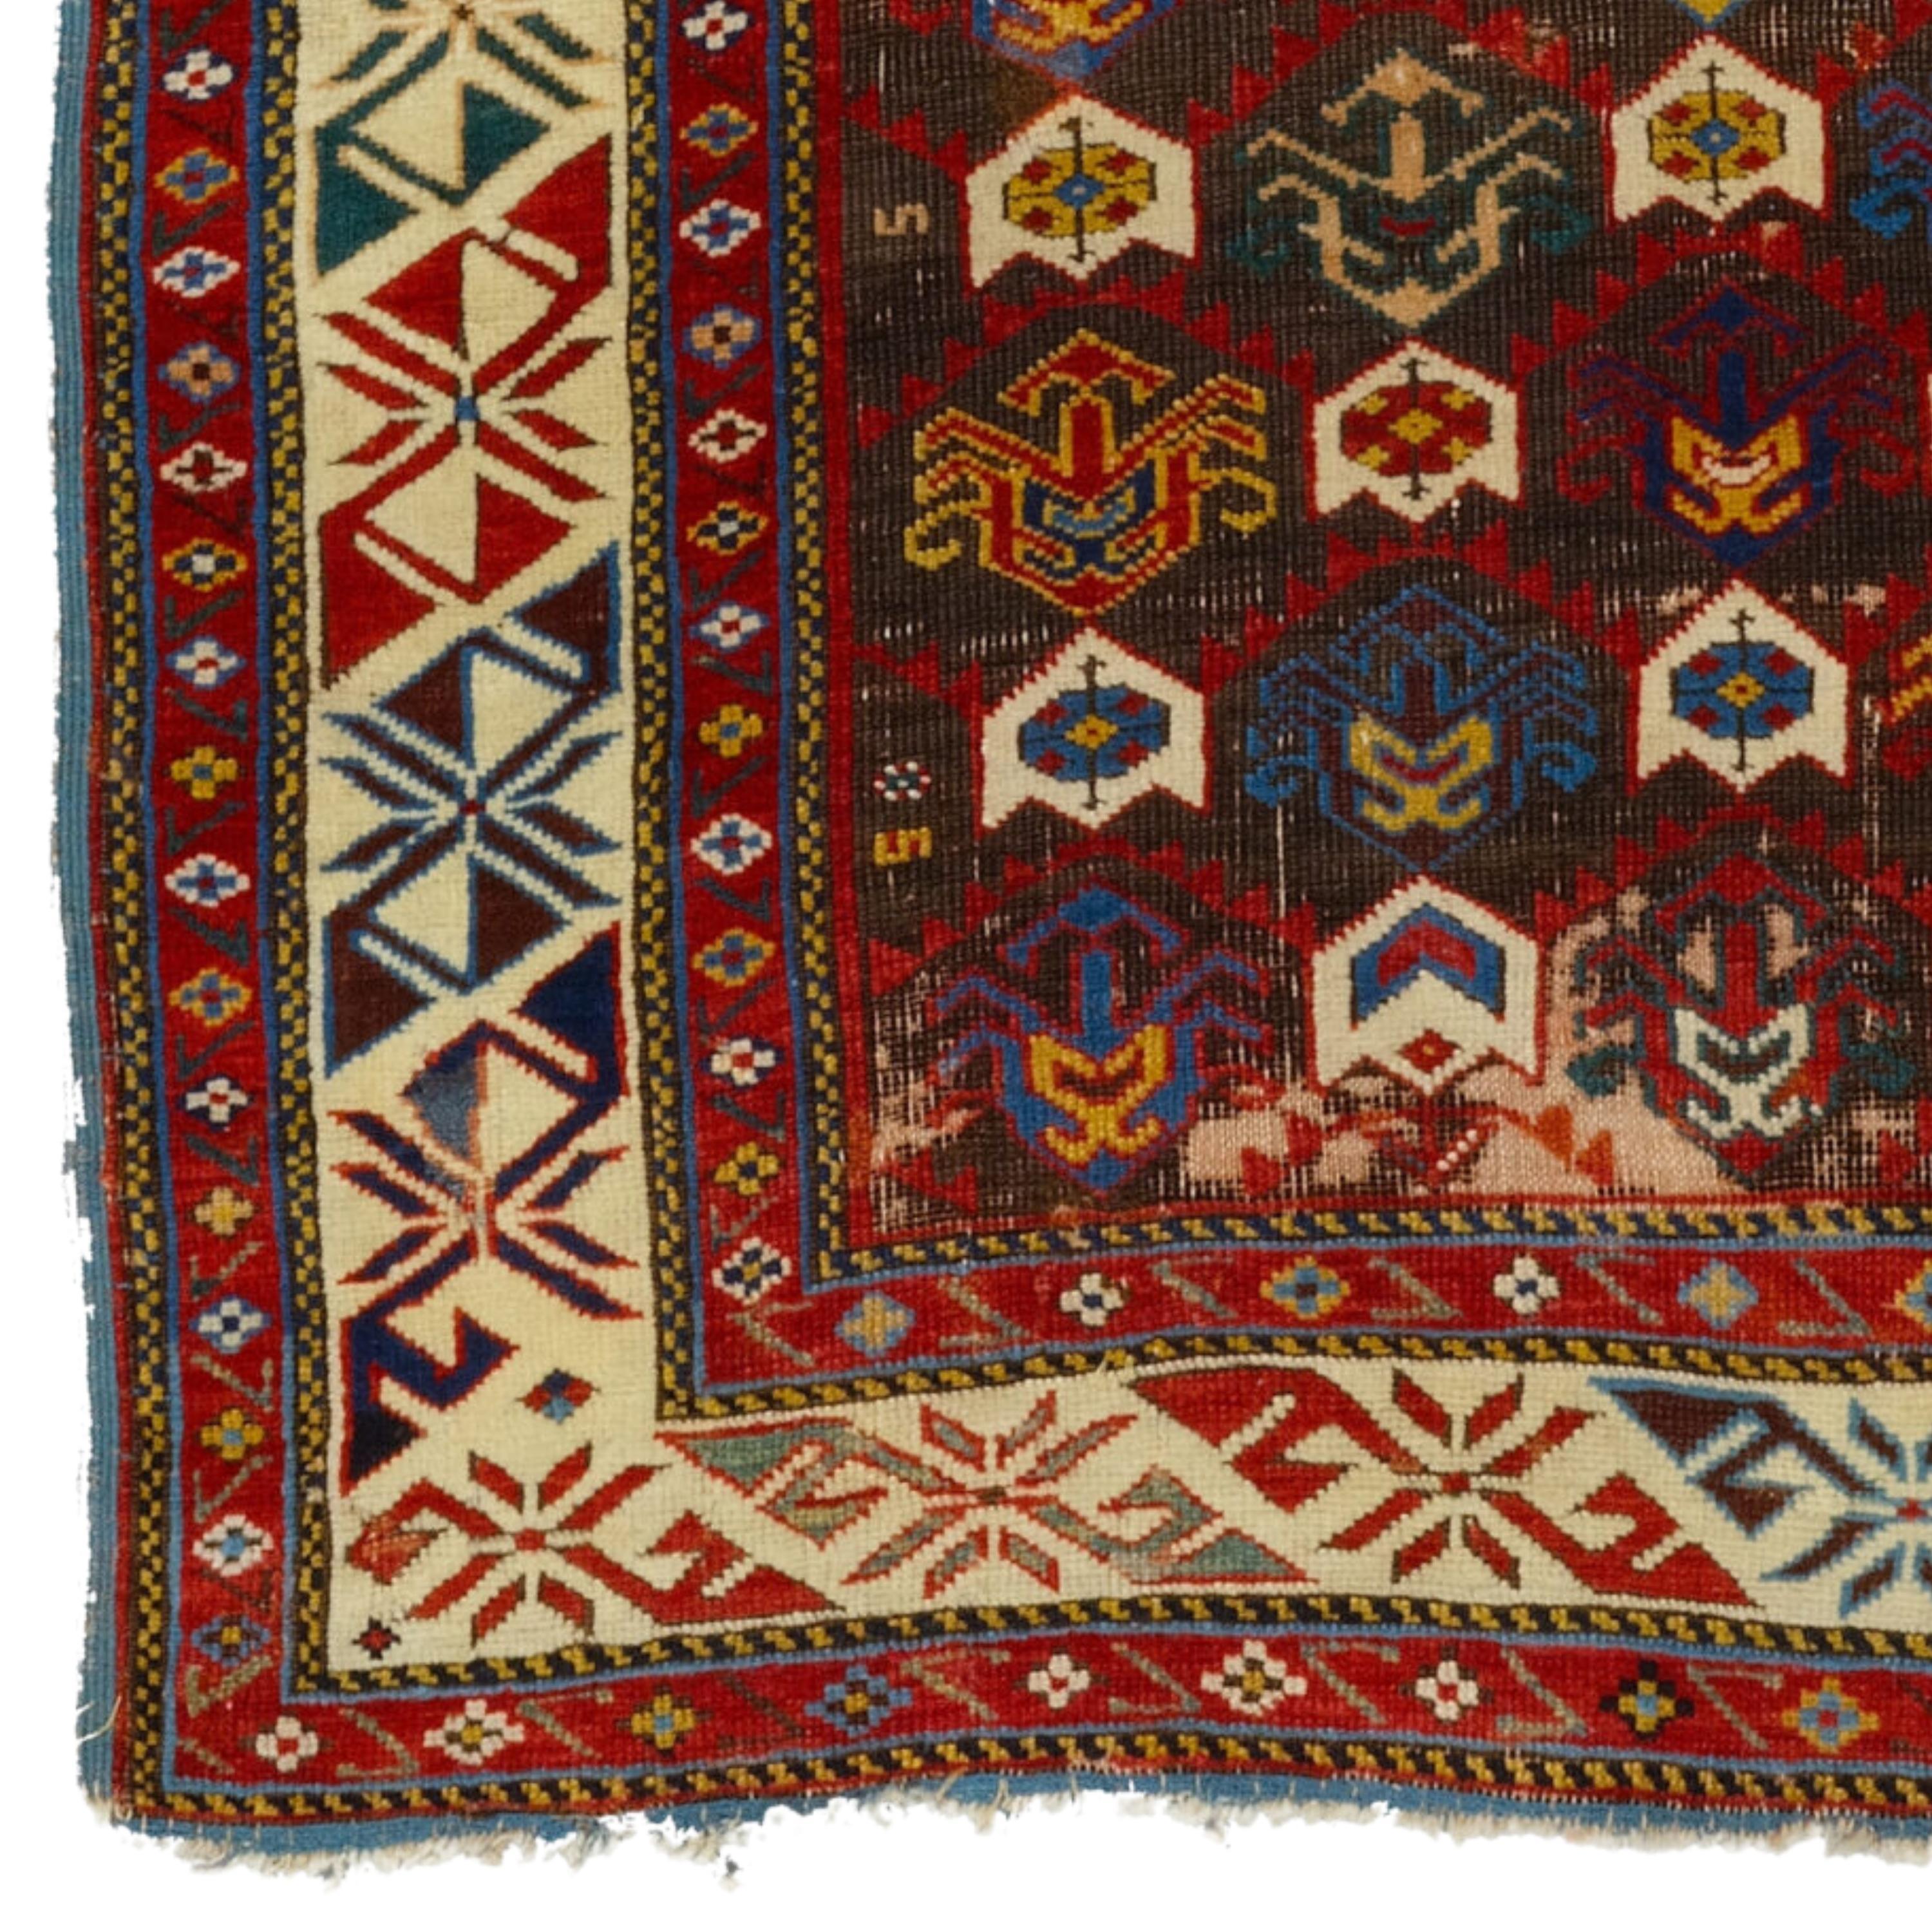 Antique Shirvan Prayer Rug
Late Of The 19th Century Caucasian Prayer Shirvan Rug, Generally Good Condition.
Size 100 x 145 cm (39,3x57 In)

The Shirvan carpet is a handmade floor covering in the Shirvan region of Azerbaijan in the Southeastern